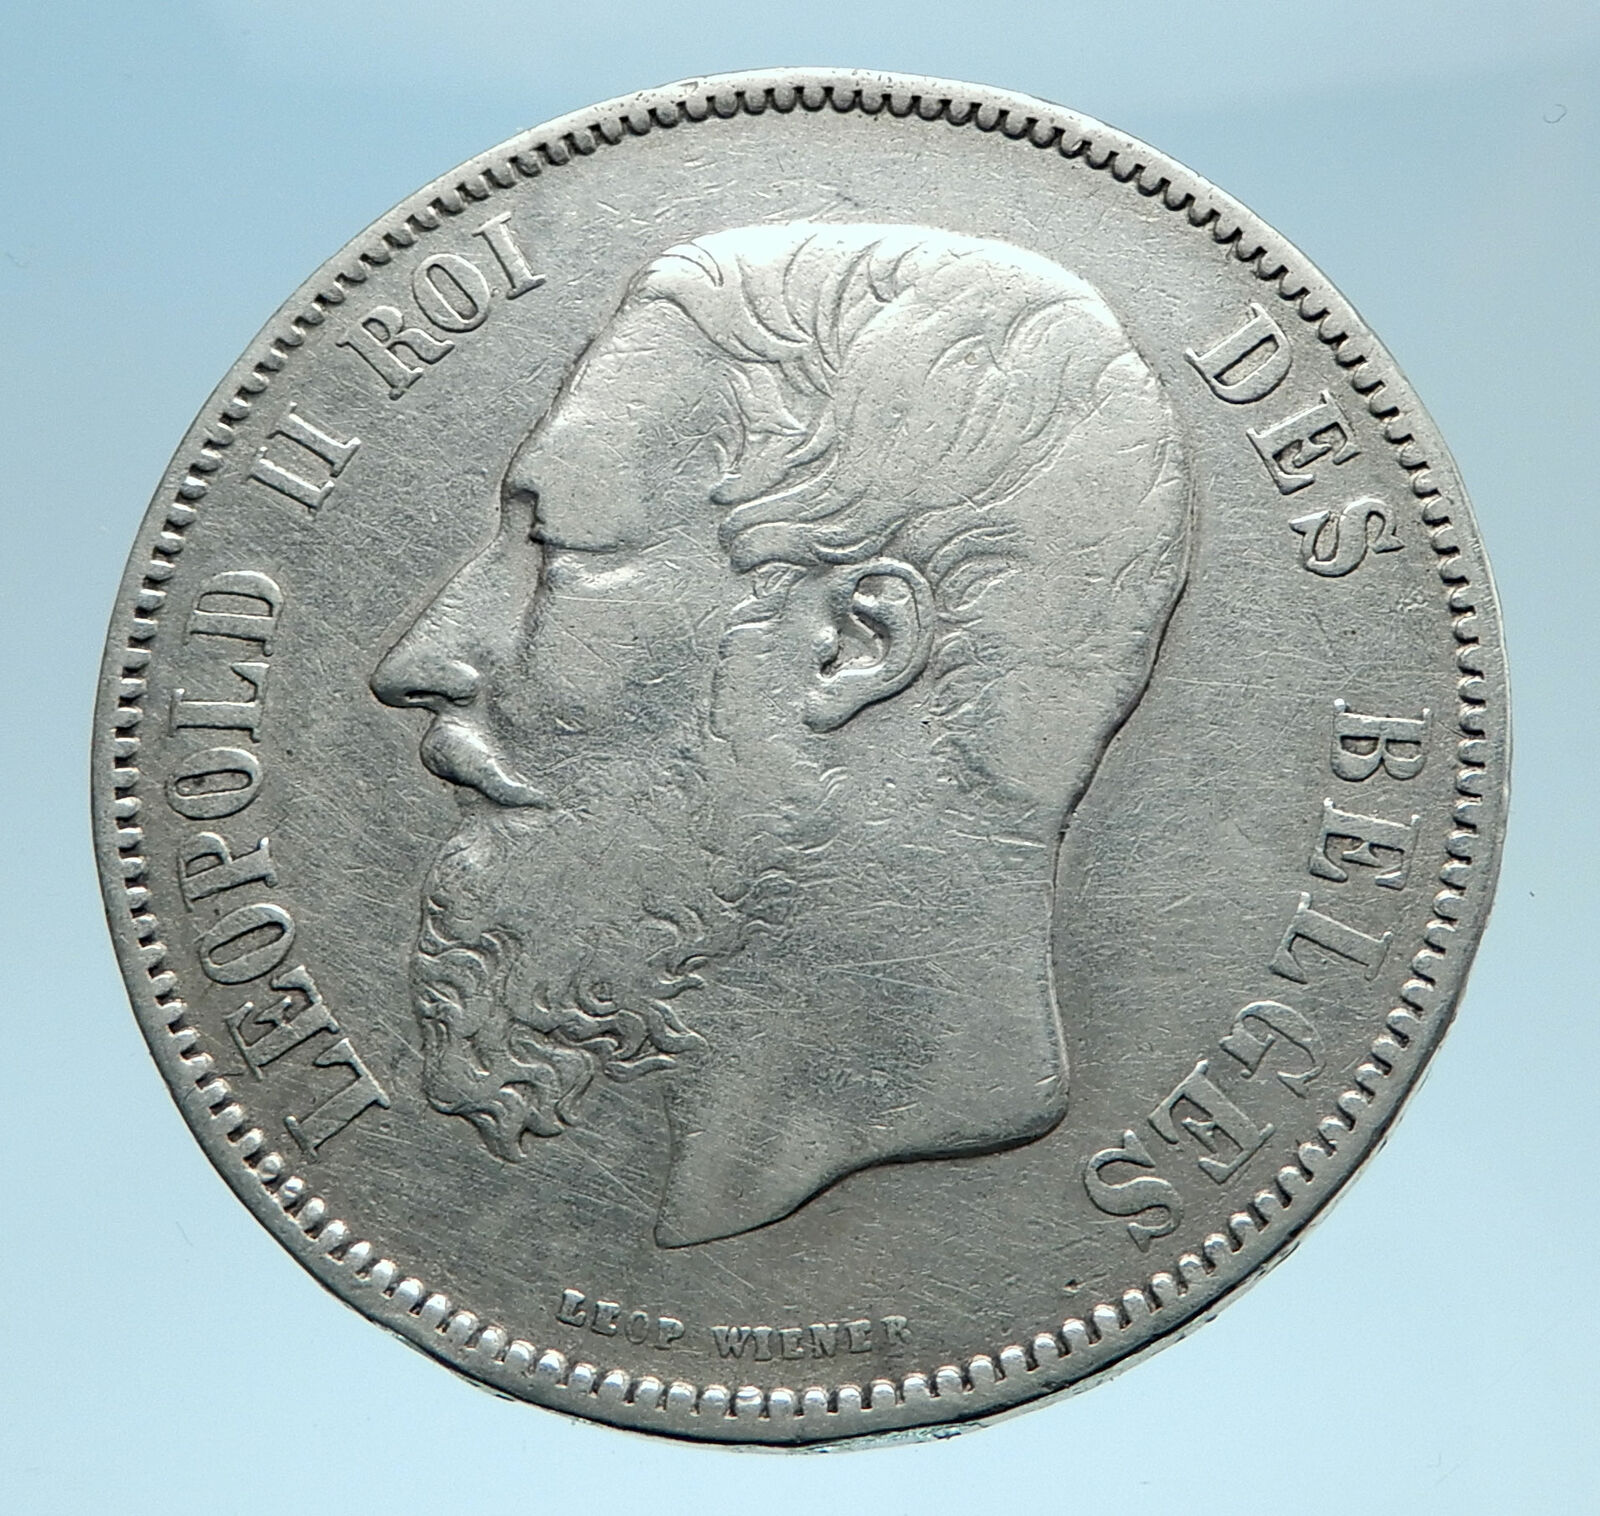 1868 BELGIUM with King LEOPOLD II and LION Antique Silver 5 Francs Coin i77783